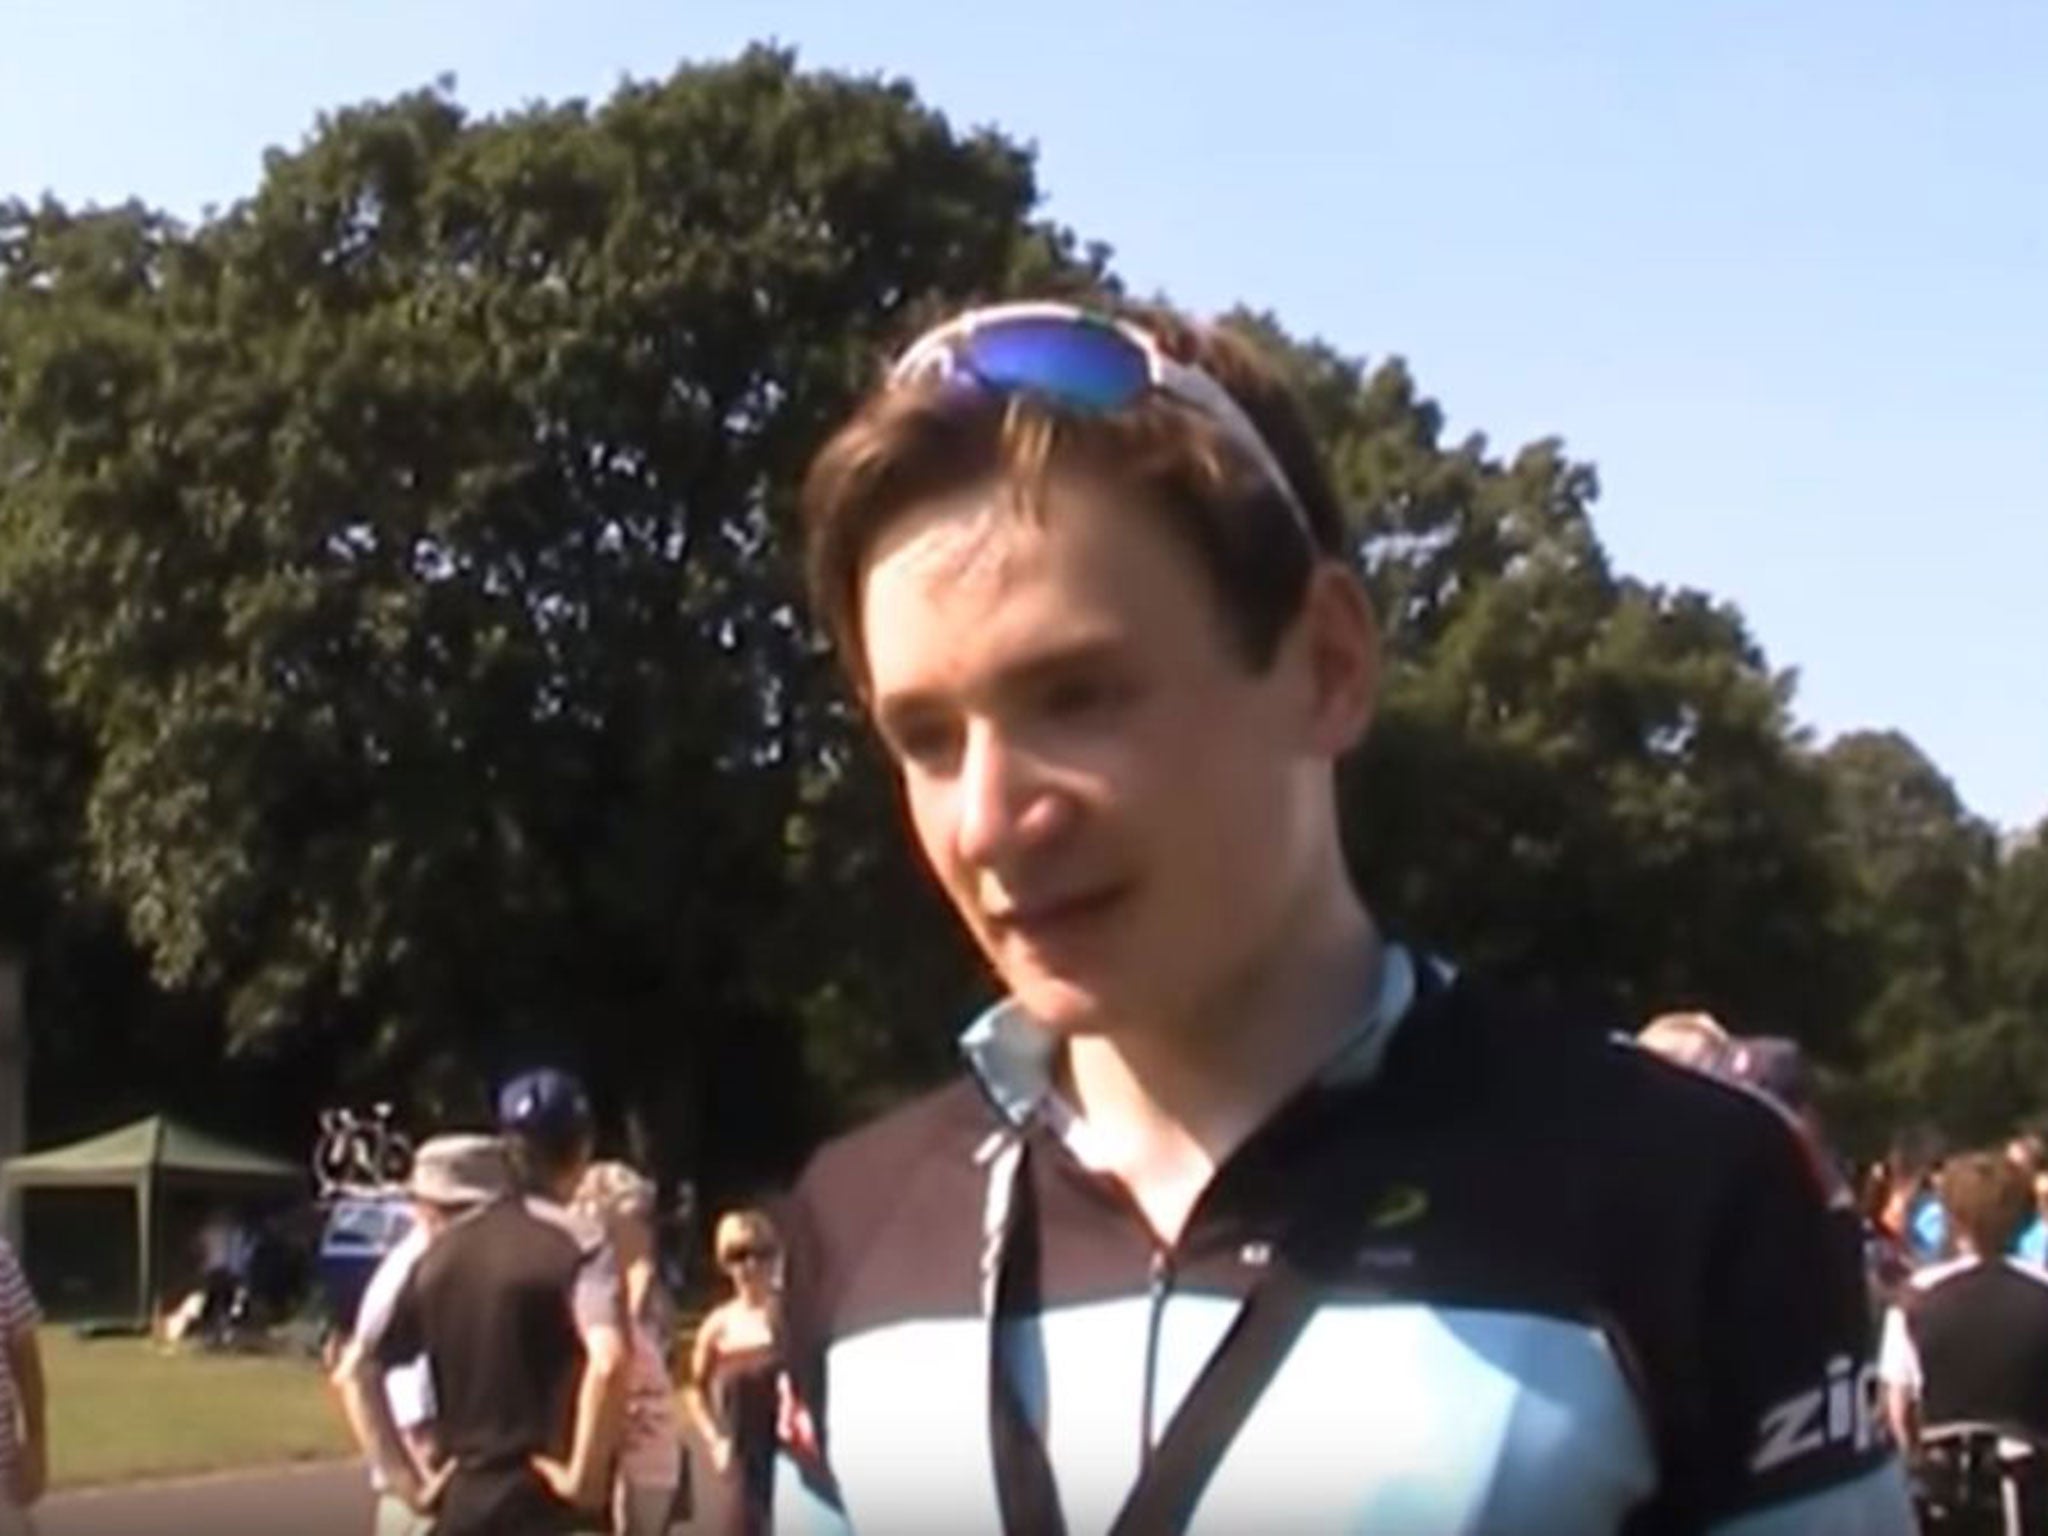 Gabriel Evans, being interviewed following his victory in the Individual Cycling event at the London Youth Games Finals in 2013